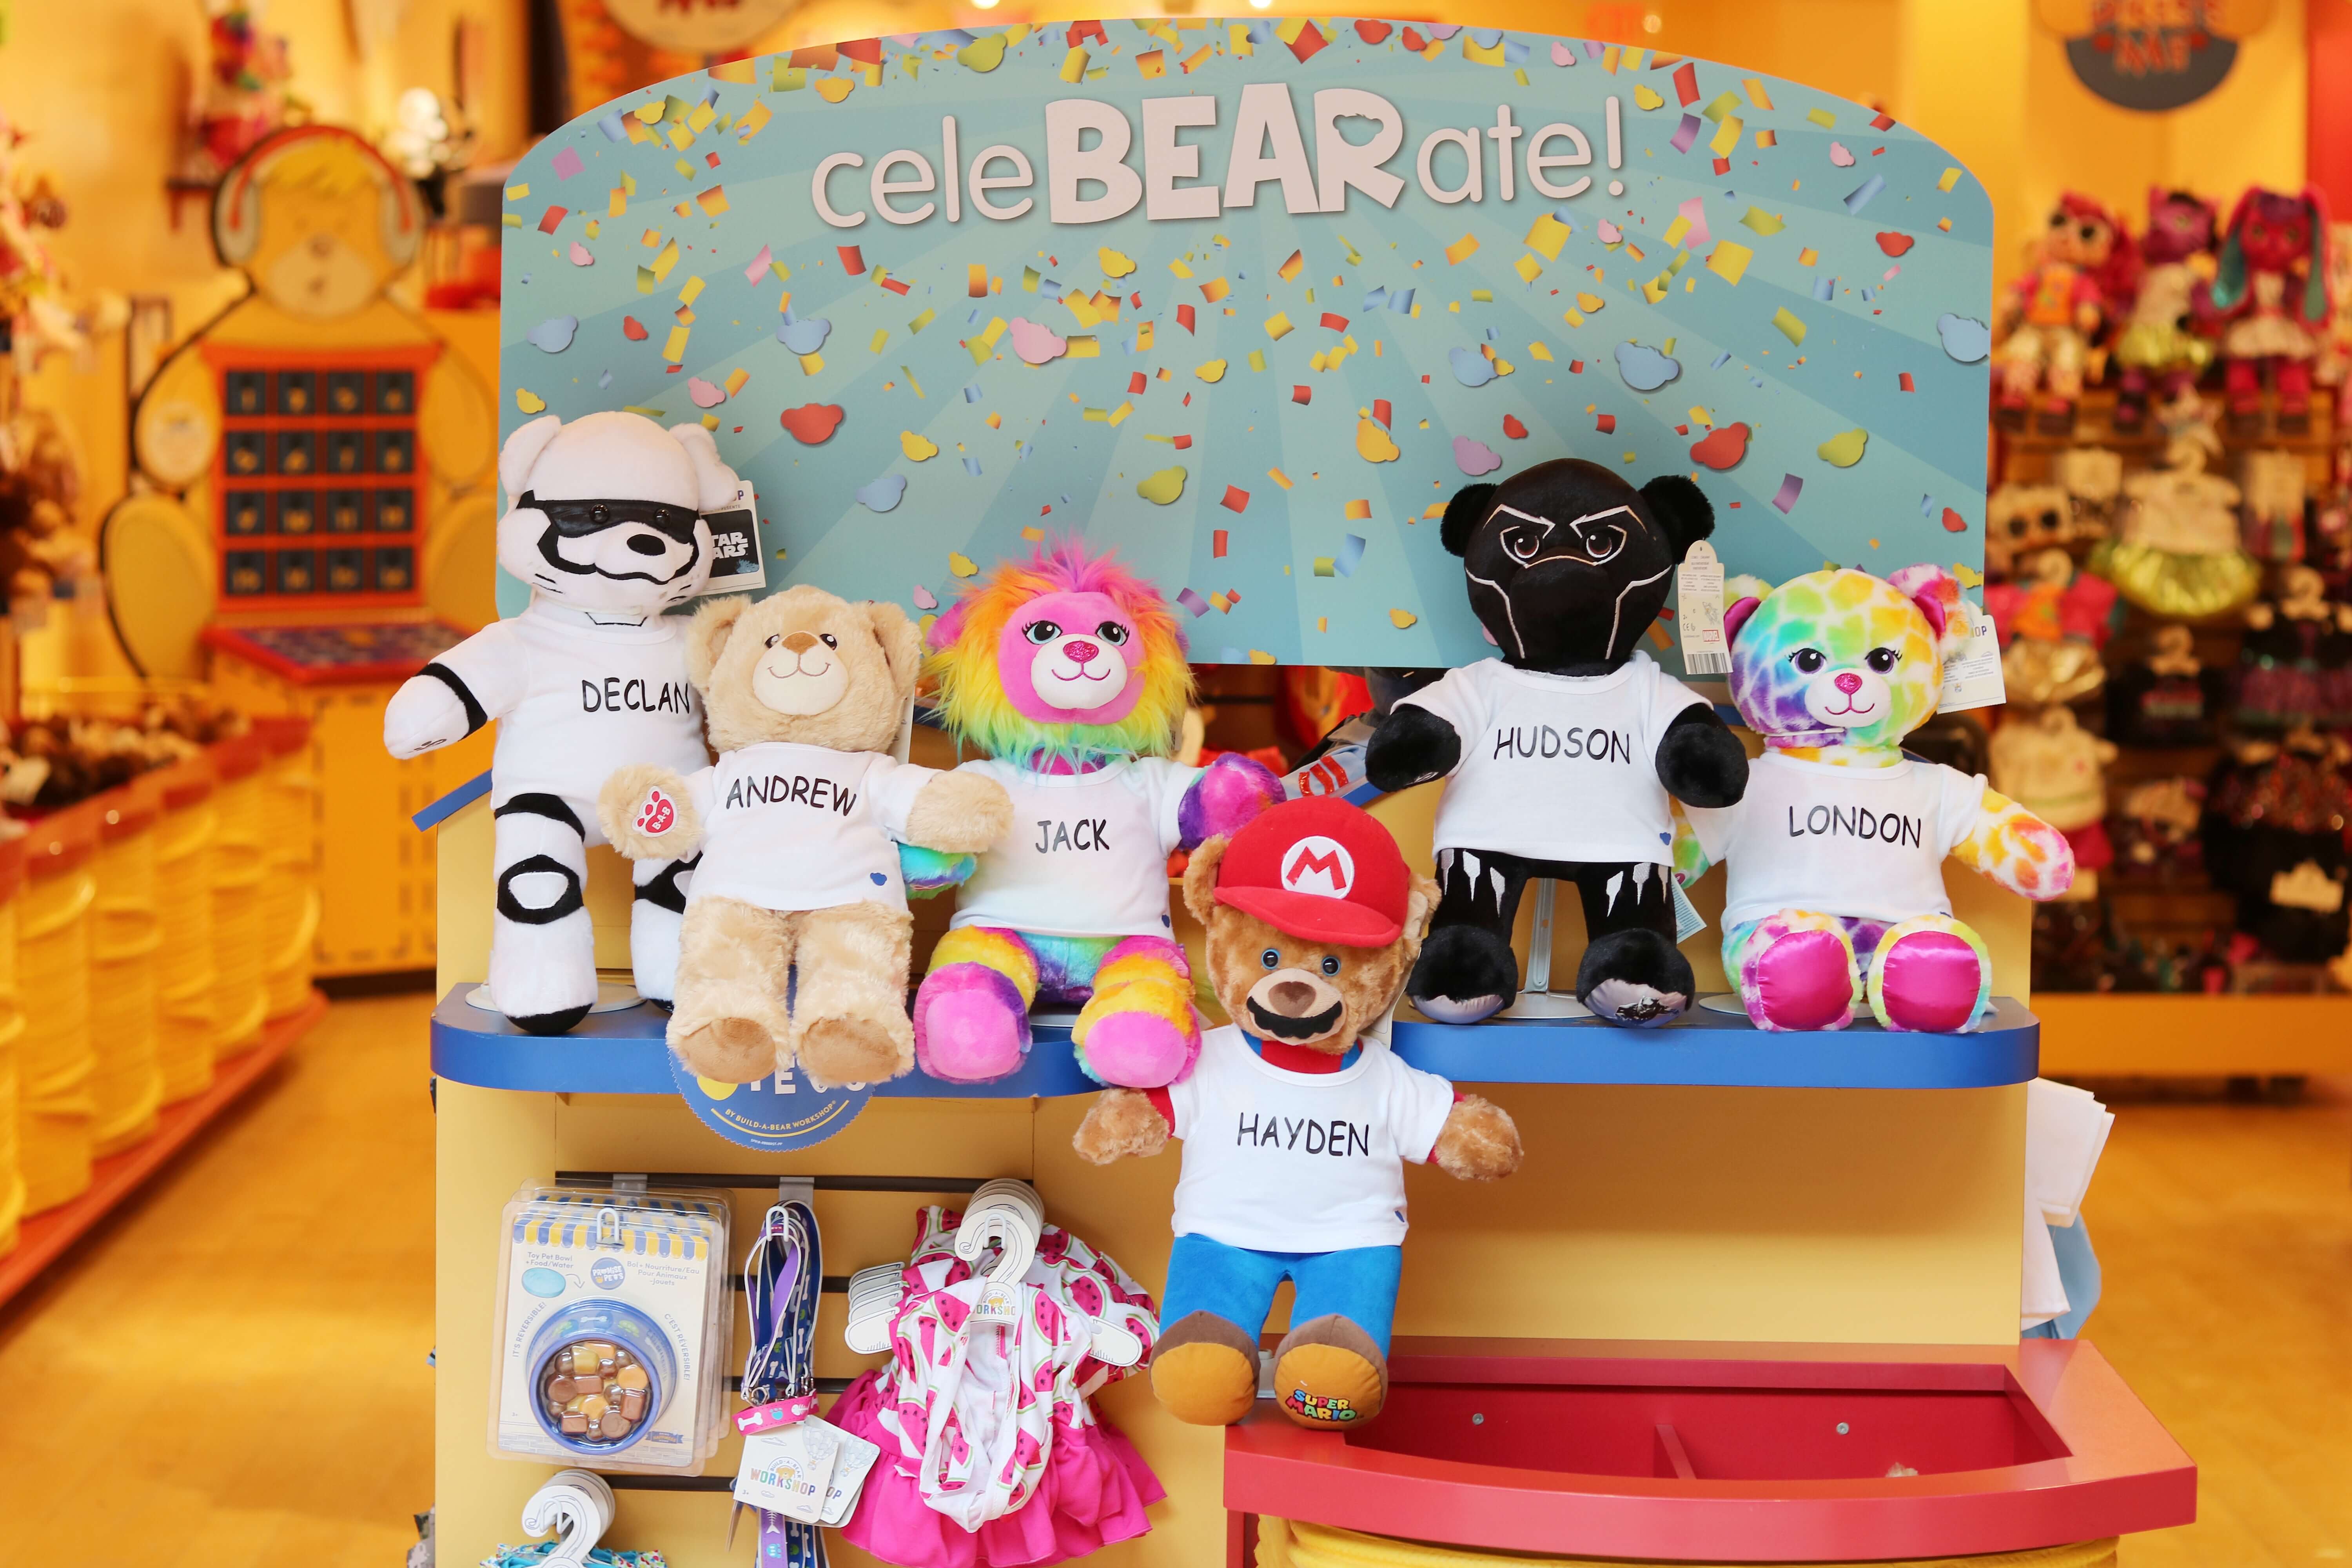 How to host a birthday party at Build-a-bear; build-a-bear birthday parties; build-a-bear oshawa centre; mandy furnis sparkleshinylove; durham region kids birthday parties